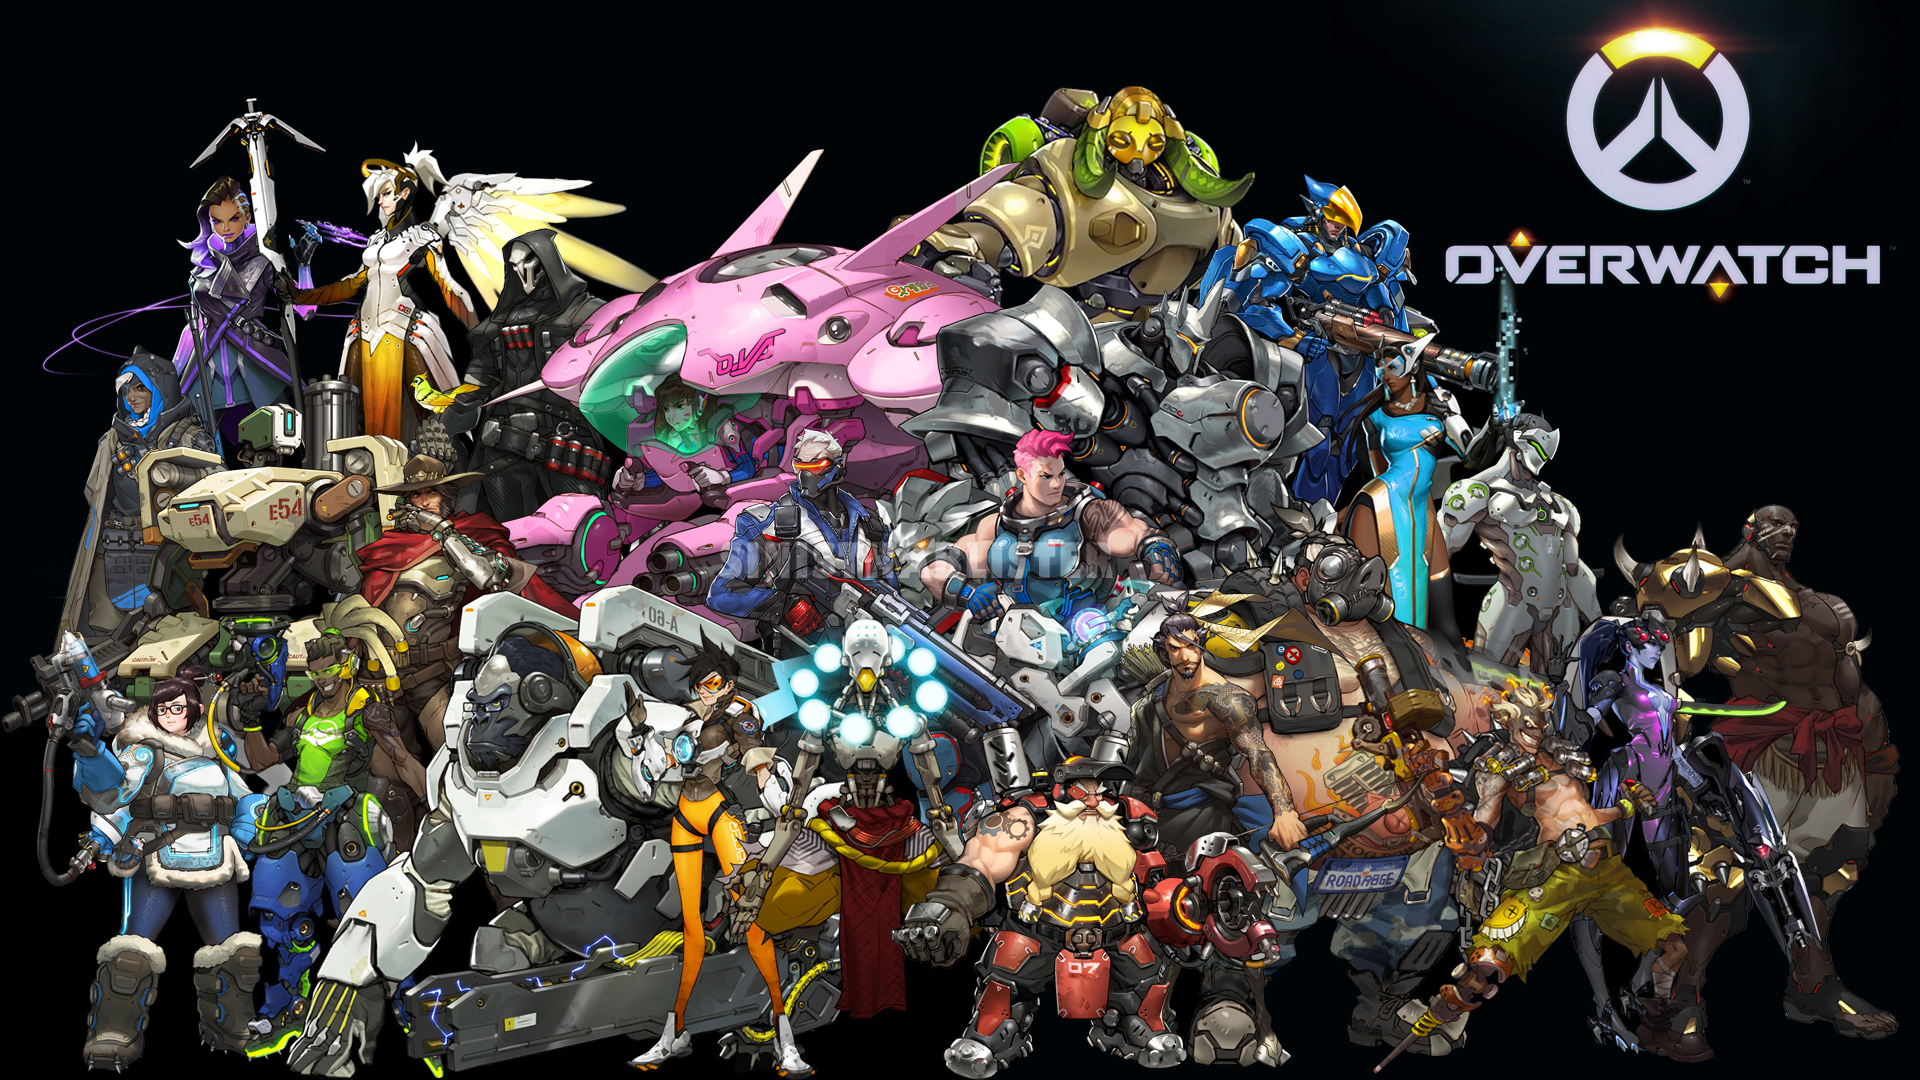 Overwatch Wallpaper For Android On Wallpaper 1080p - 1920x1080 Wallpaper -  